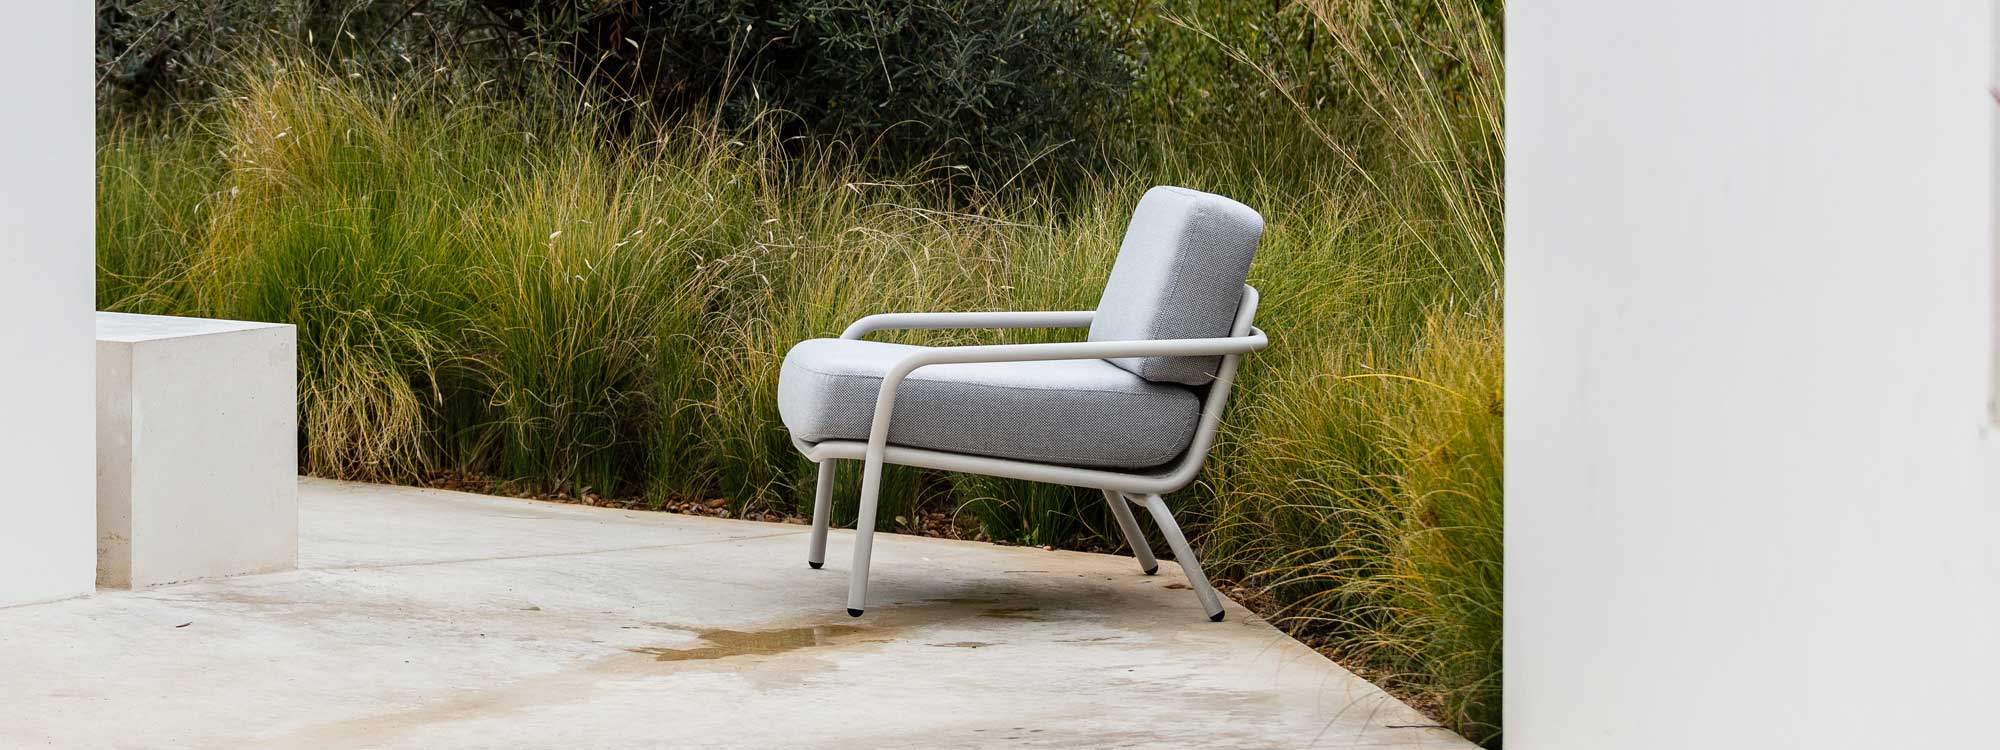 White Starling modern outdoor relax chair with White frame and Grey cushions in front of ornamental grasses